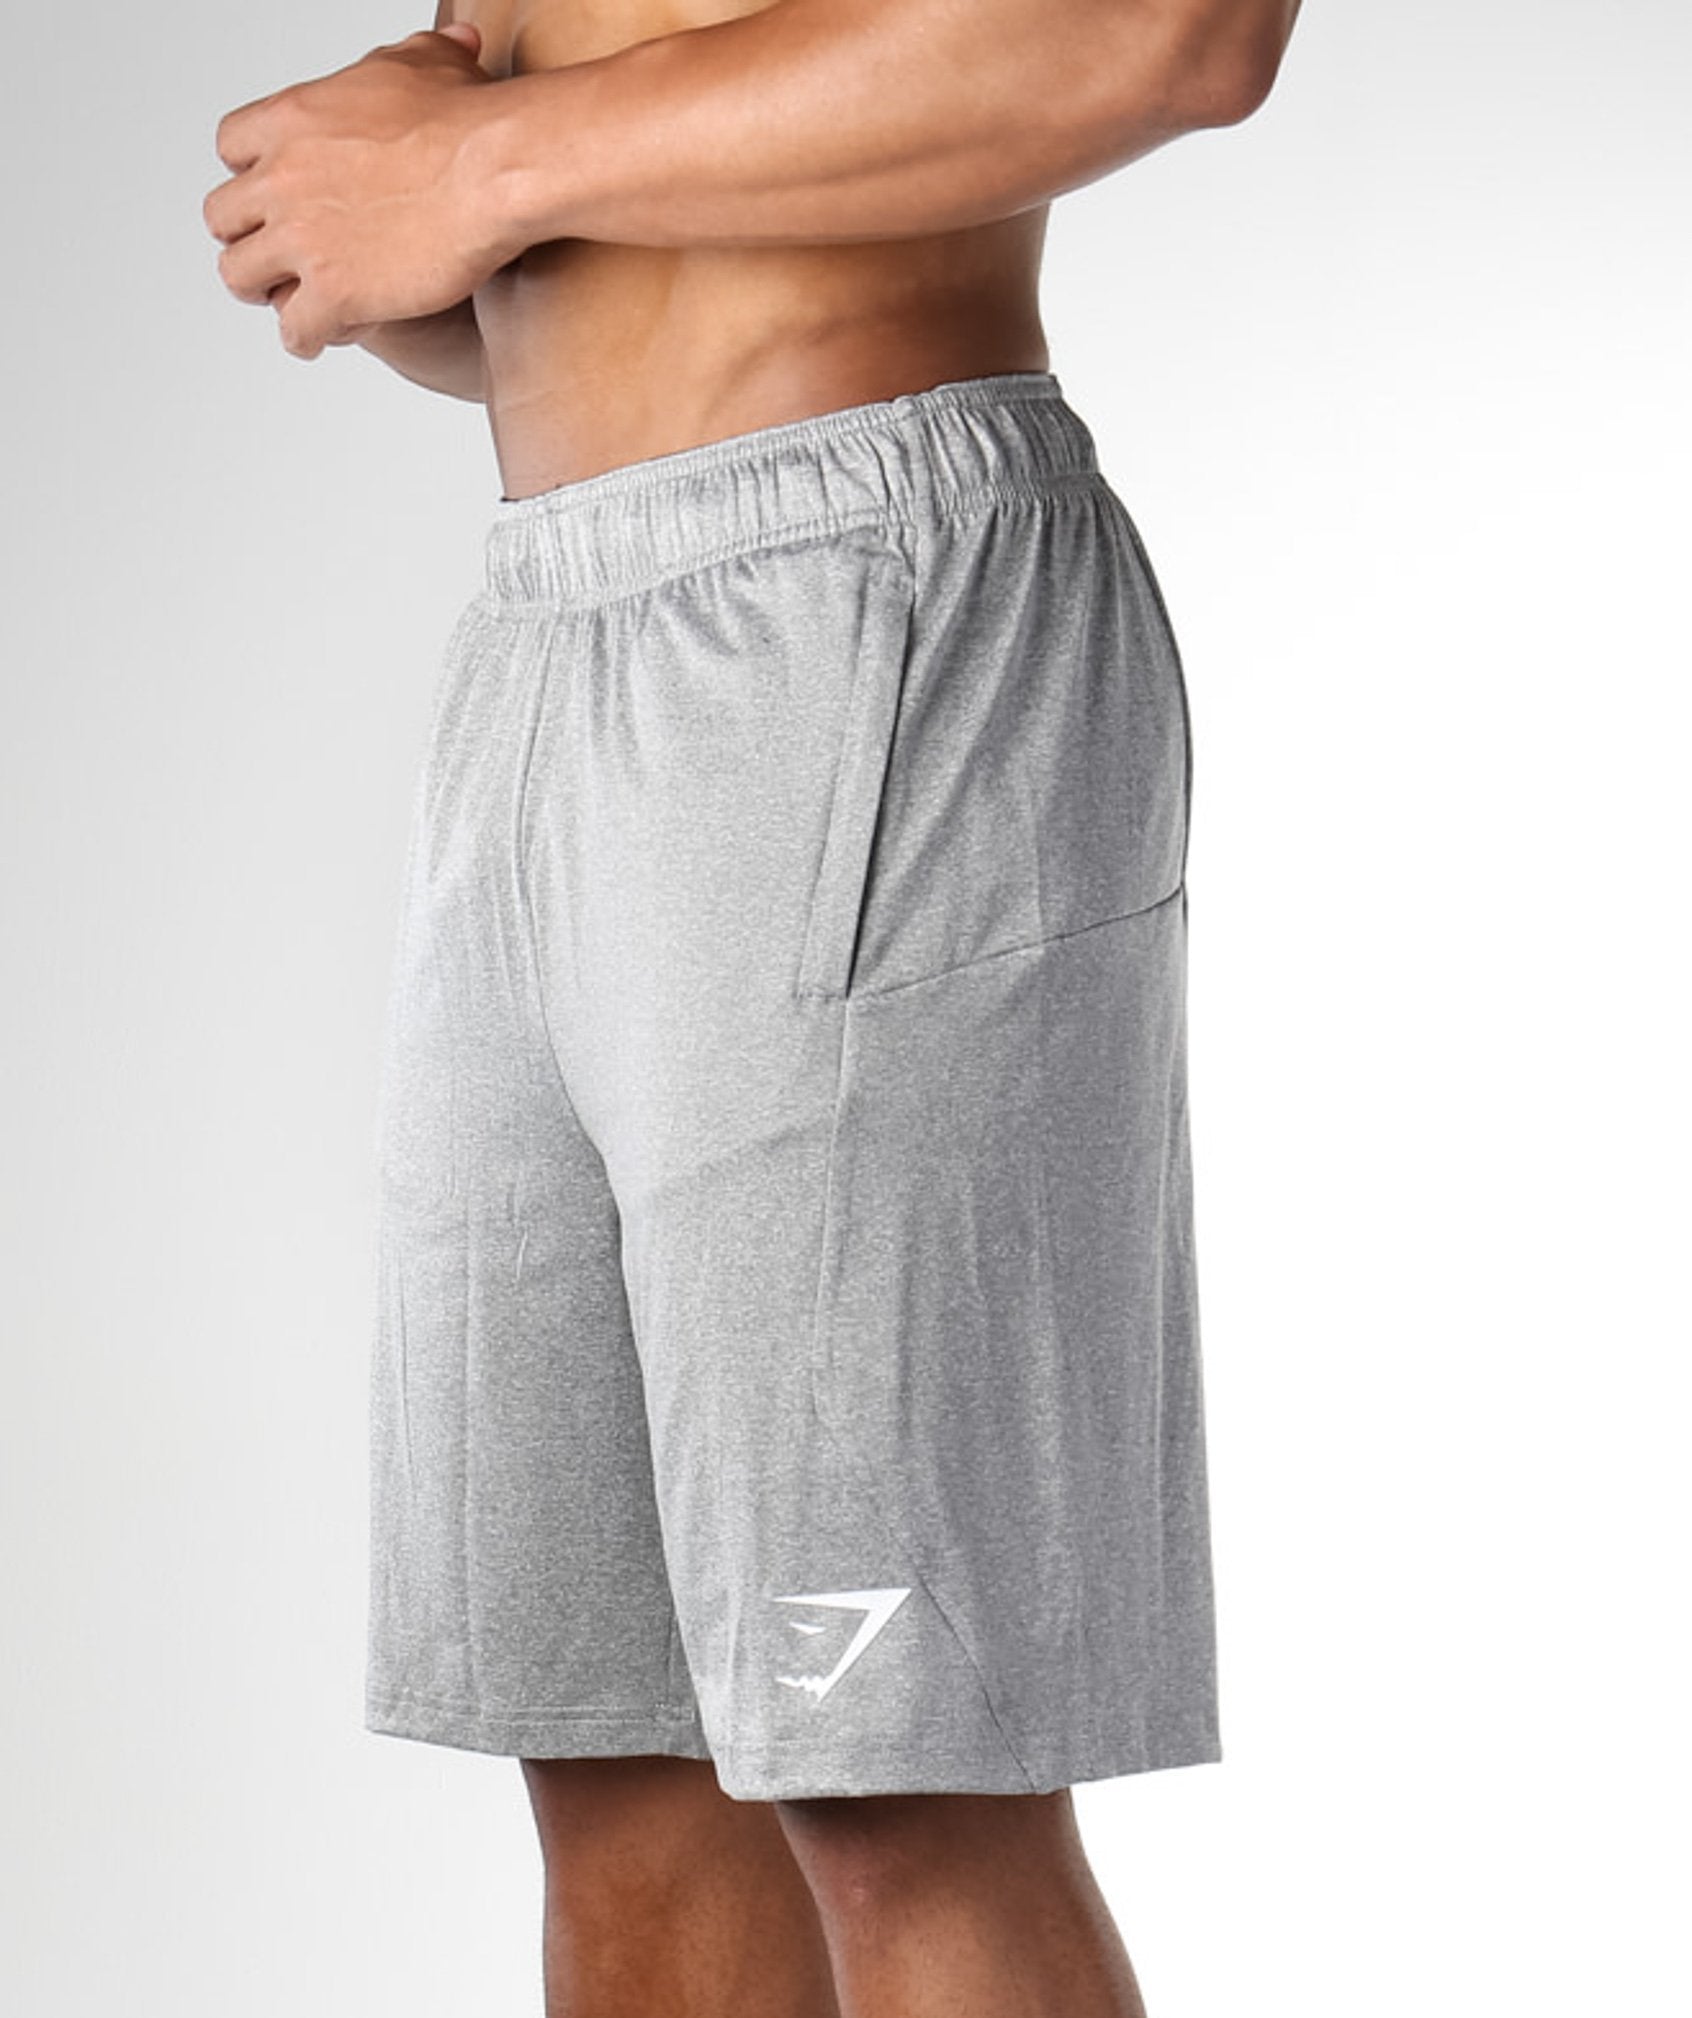 DRY Element Sweat Shorts in Grey - view 6